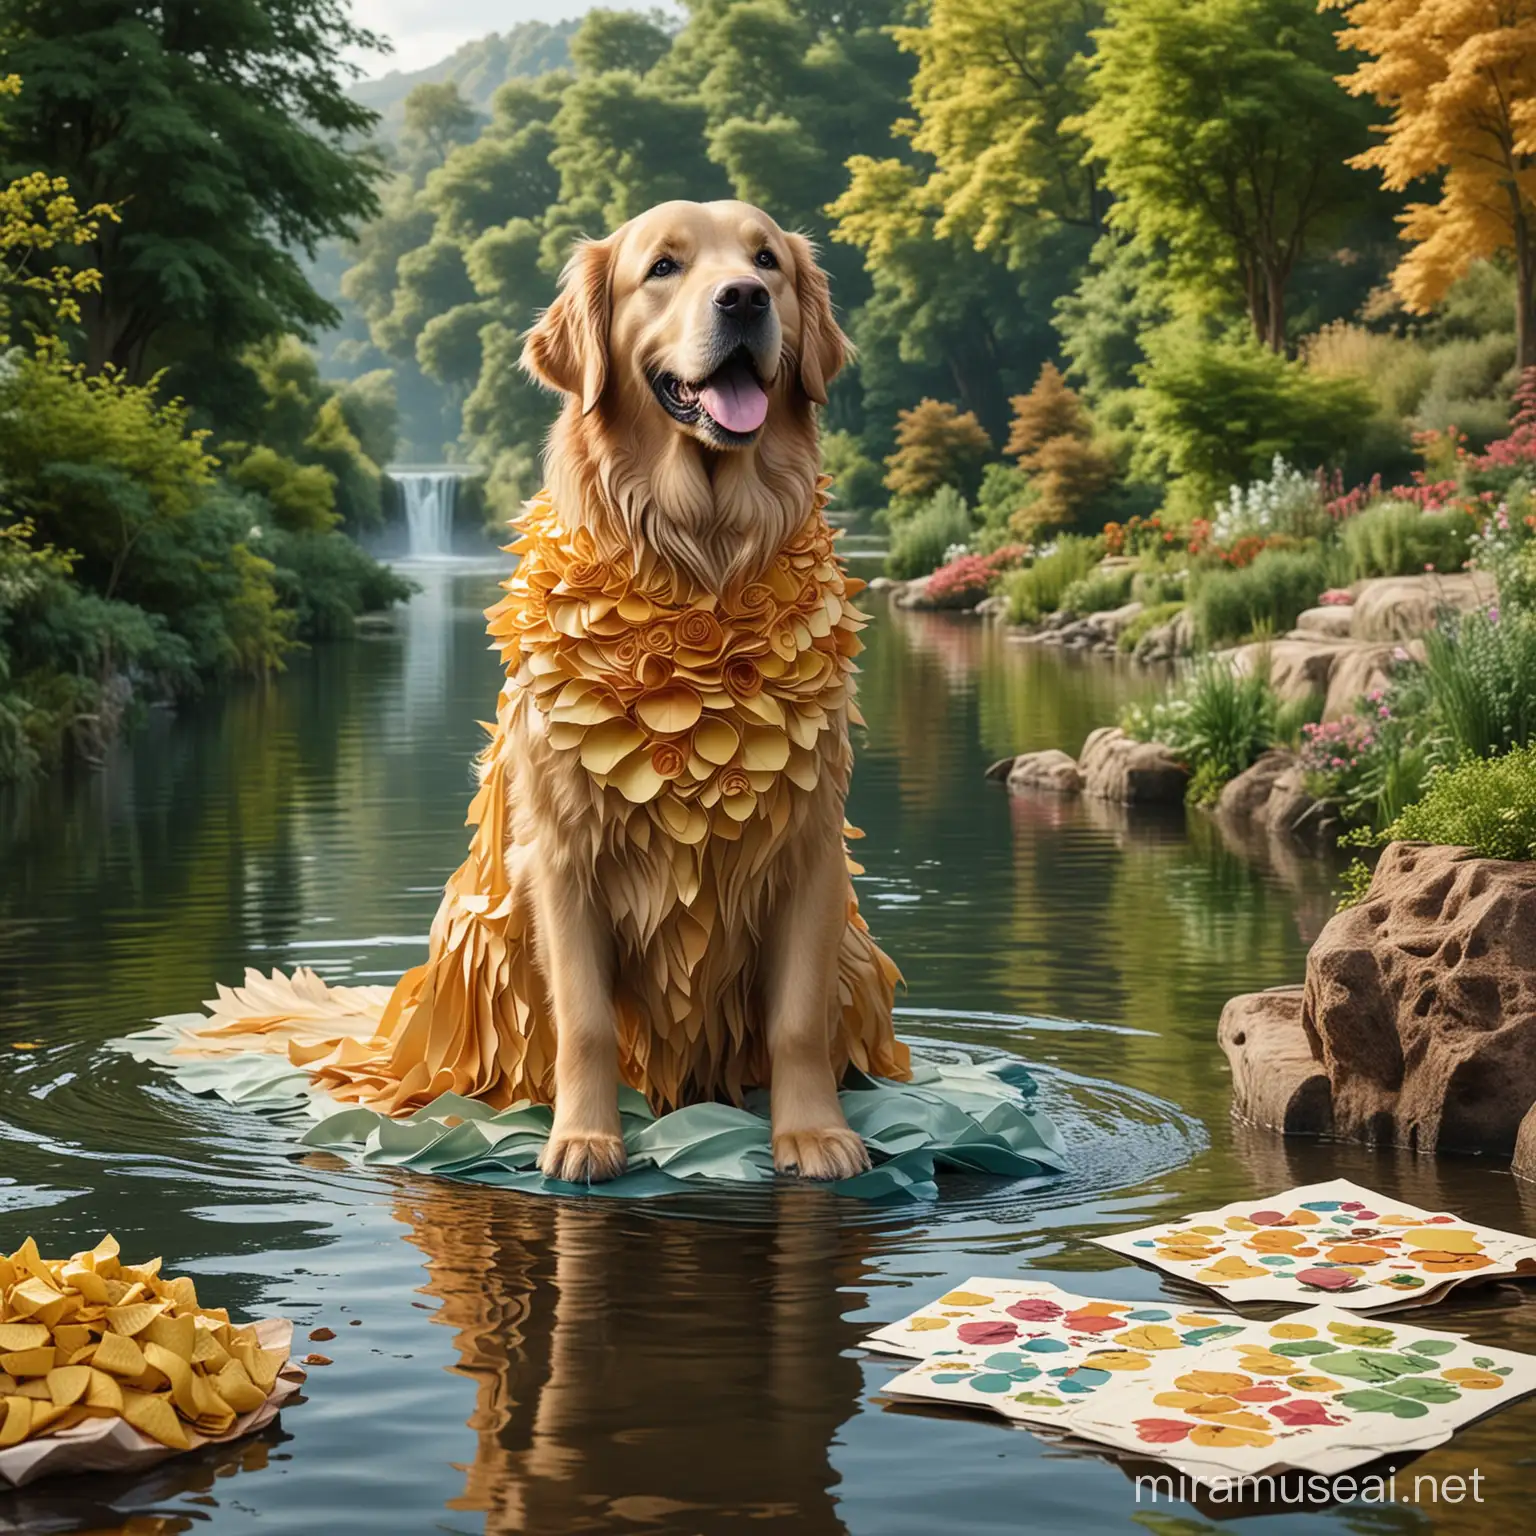 a big realistic beautiful golden retriever is made up of paper, paper shape and colors on the mermaid face standing near a lush river which should look like wonderland, tables made-up of pure chocolate, macaroni as trees which are pastel color, humans are in realistic modern gowns. town should look realistic and high detailed paper place